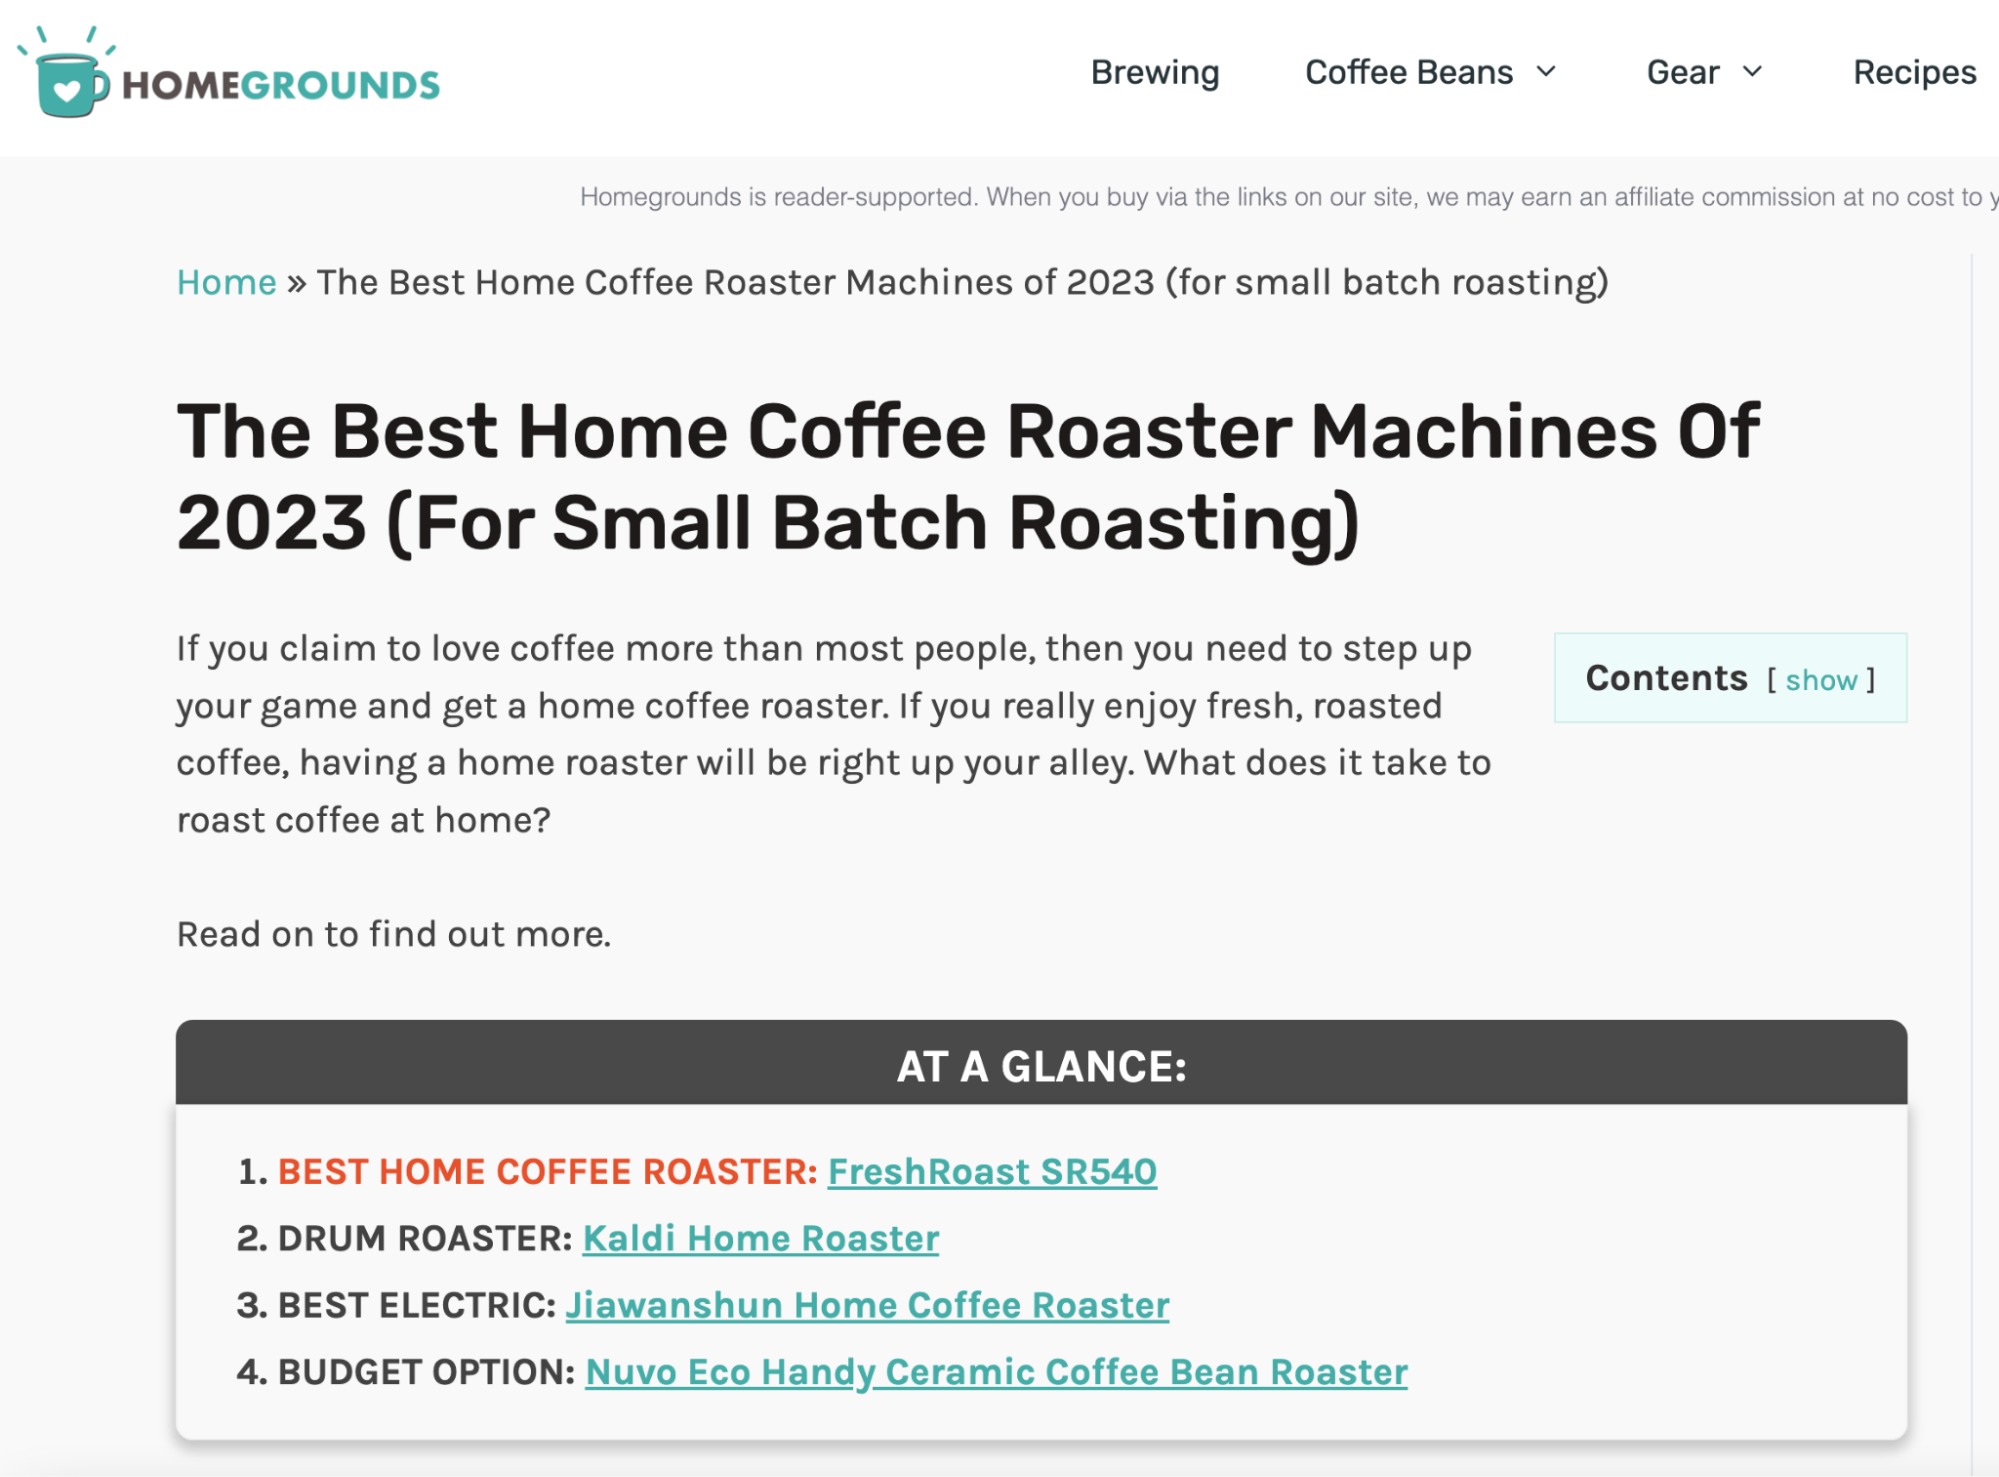 Homegrounds' review of the best coffee roasters